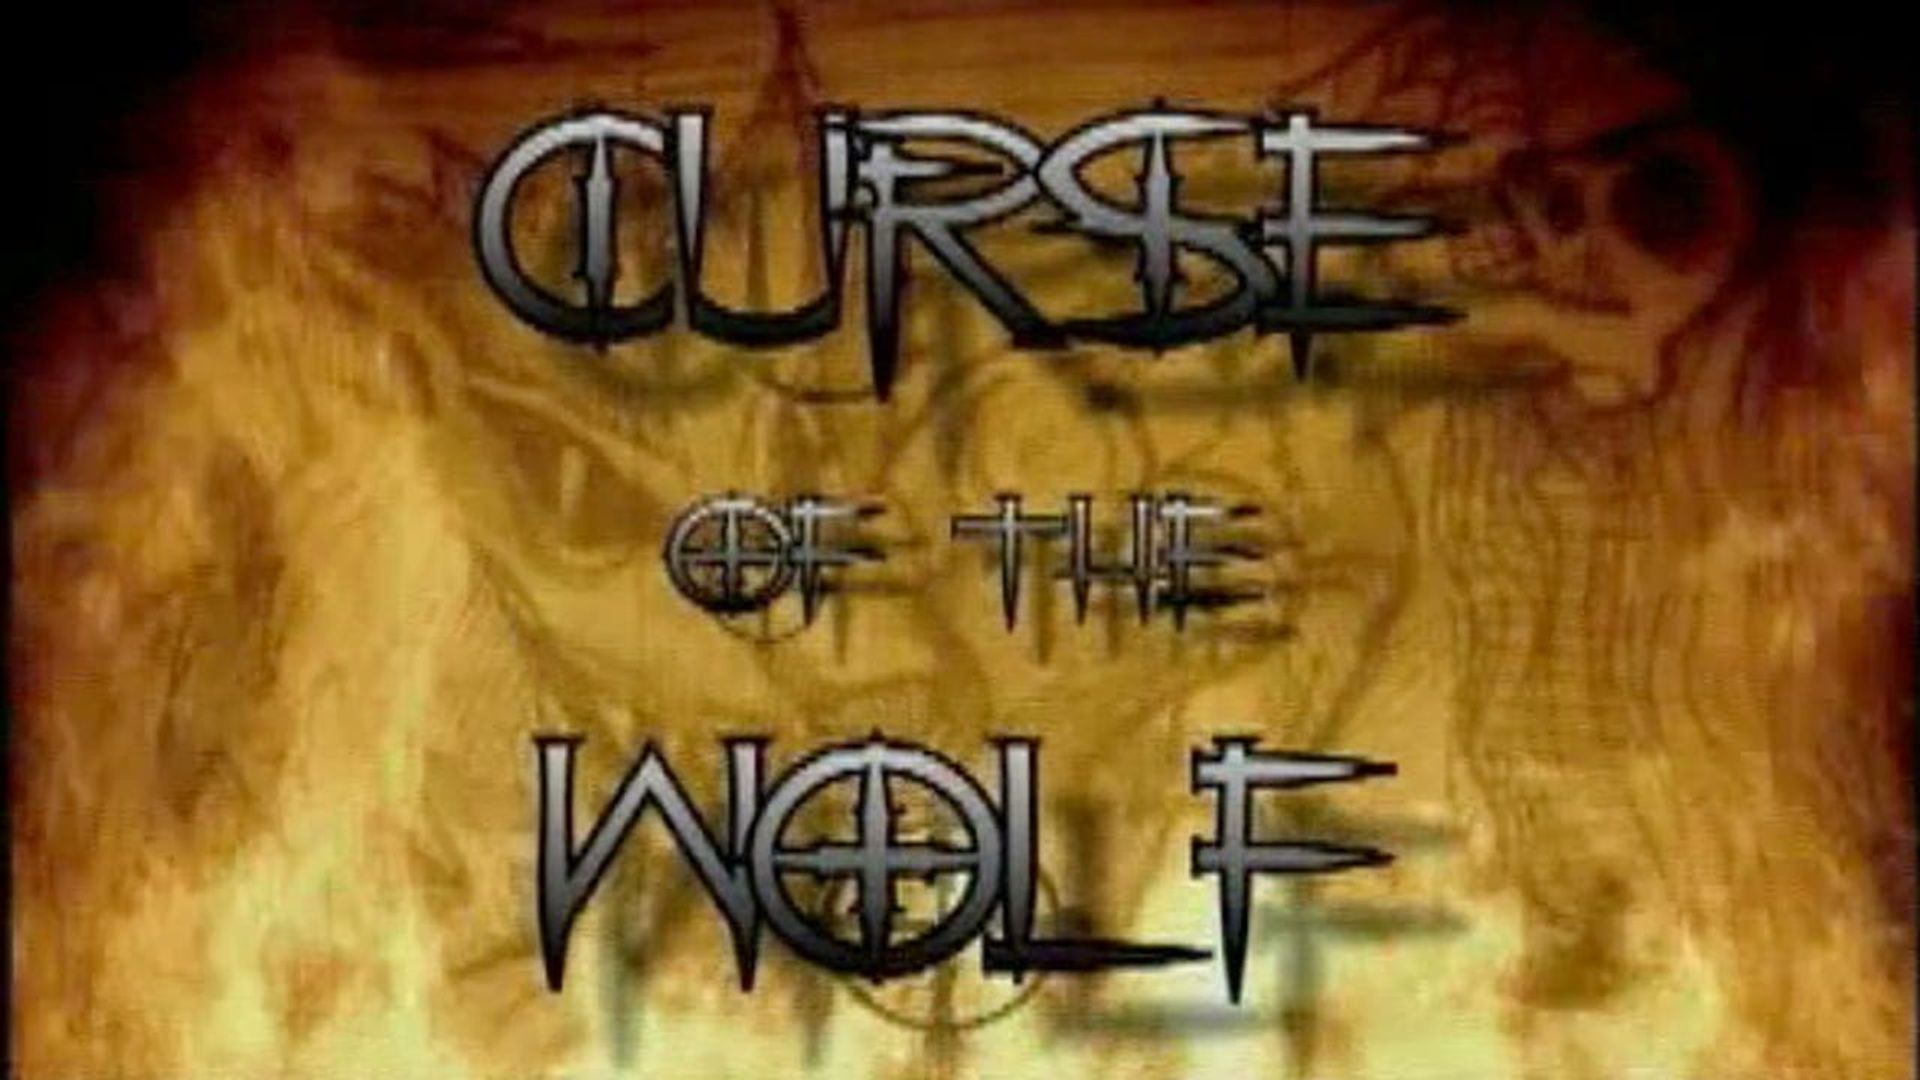 Curse of the Wolf background